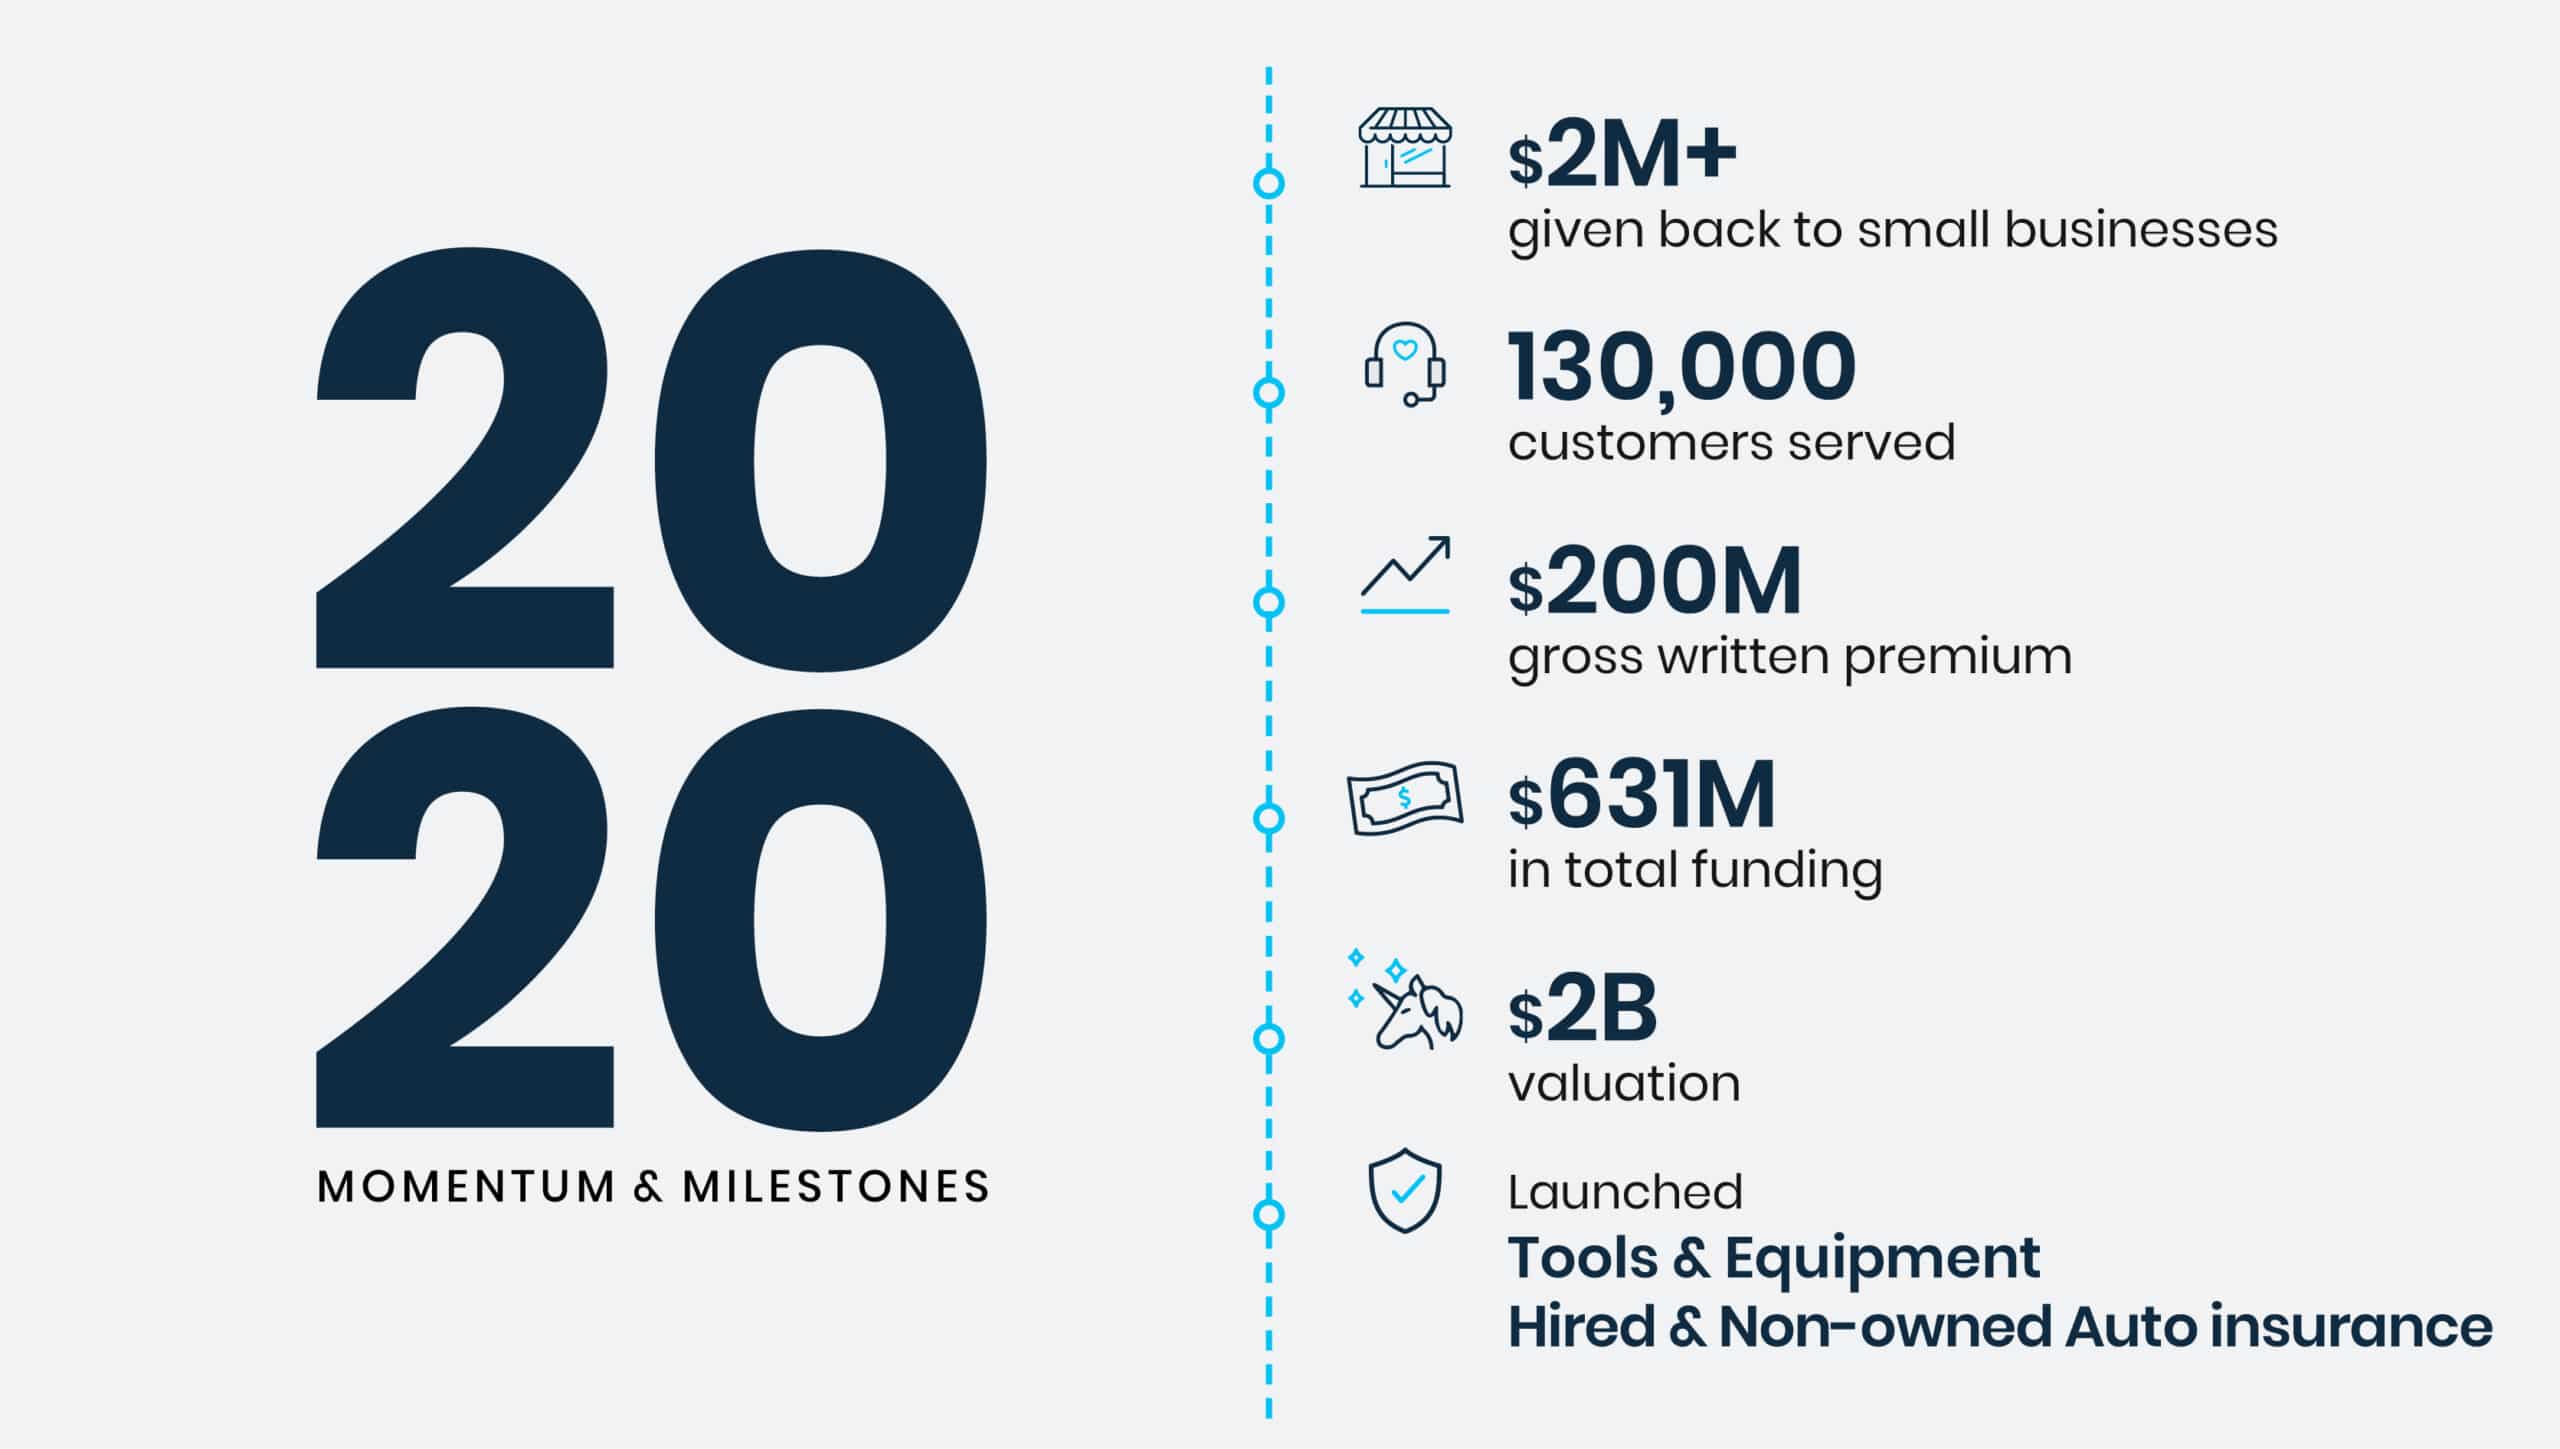 Momentum & milestones: How we’re helping small businesses thrive